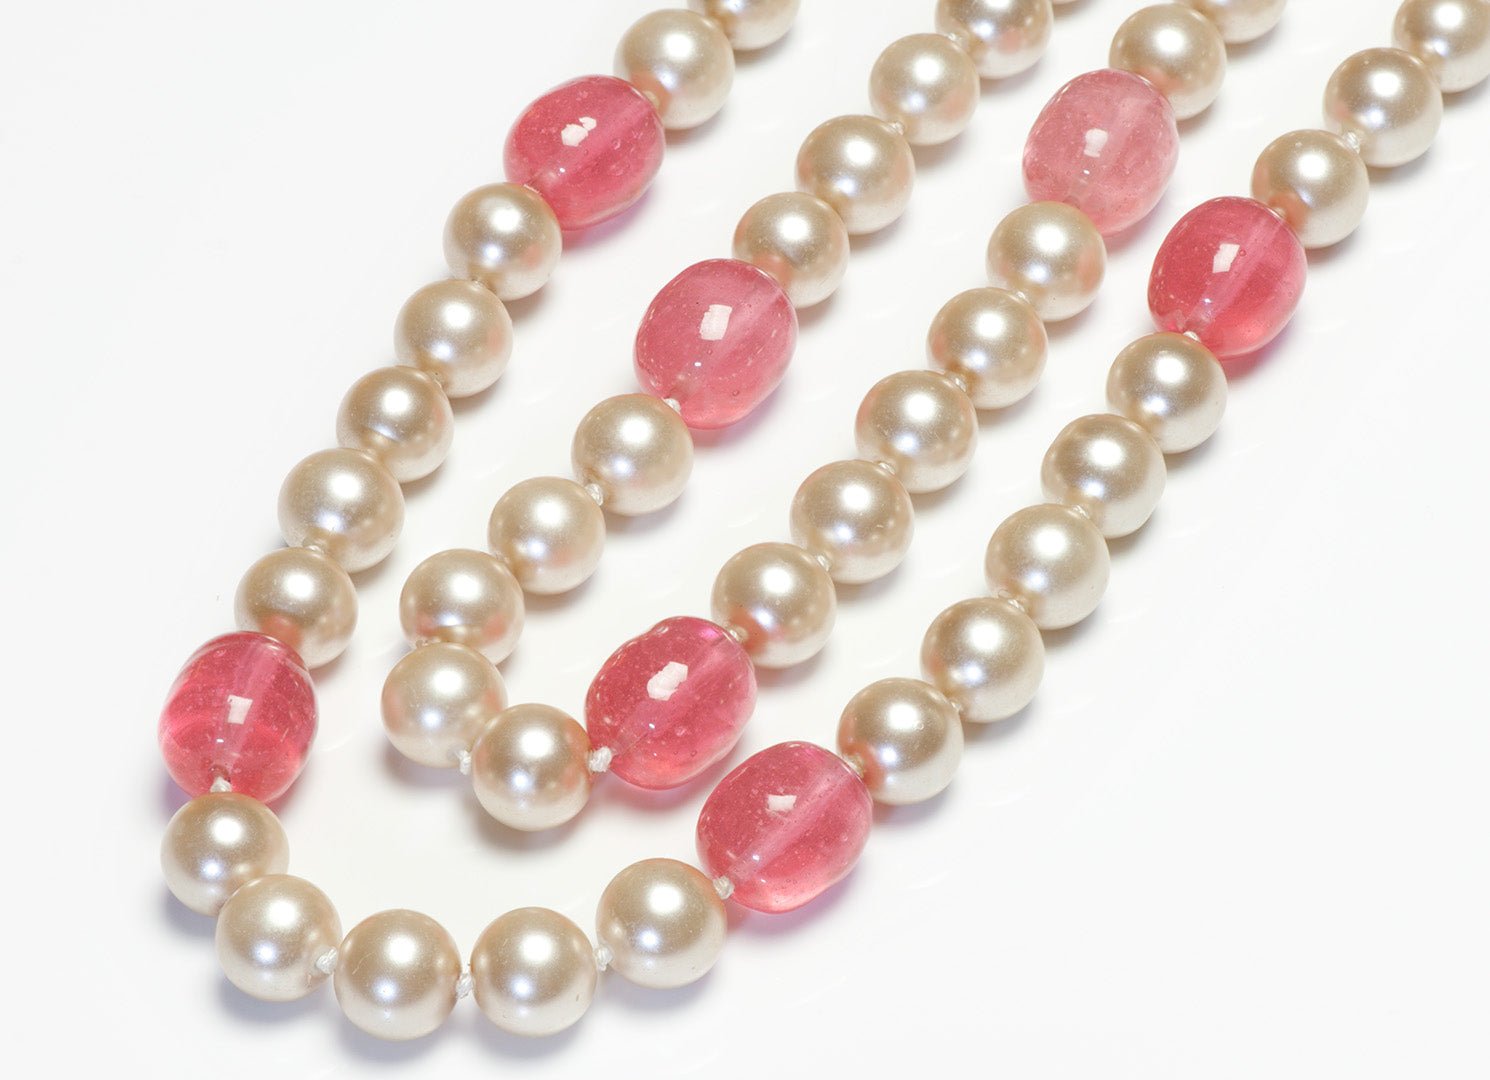 Chanel Spring 1997 Maison Gripoix Pink Glass Pearl Beads Sautoir Necklace - DSF Antique Jewelry